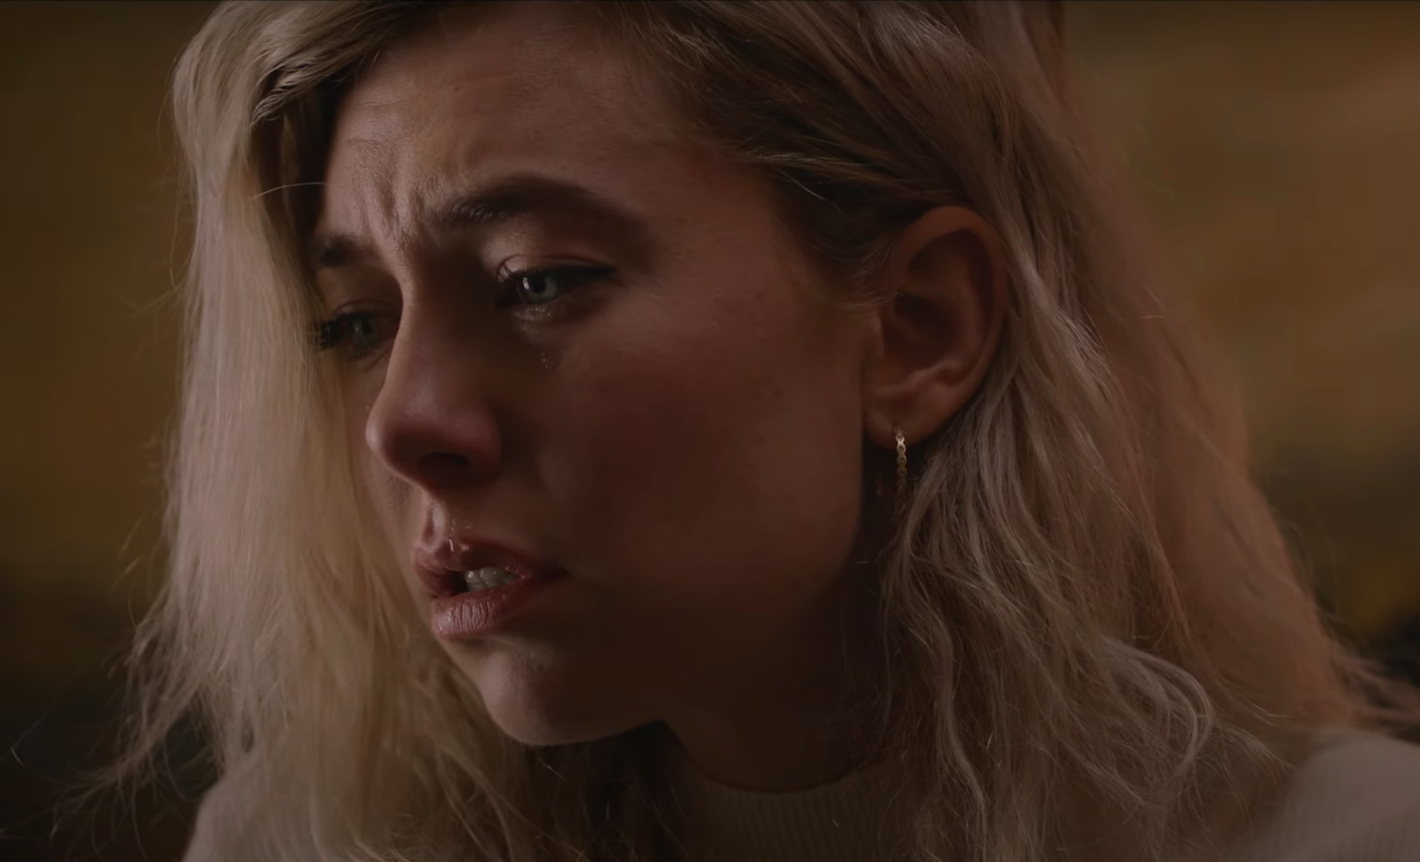 Shia LaBeouf & Vanessa Kirby to Star in Pieces of a Woman